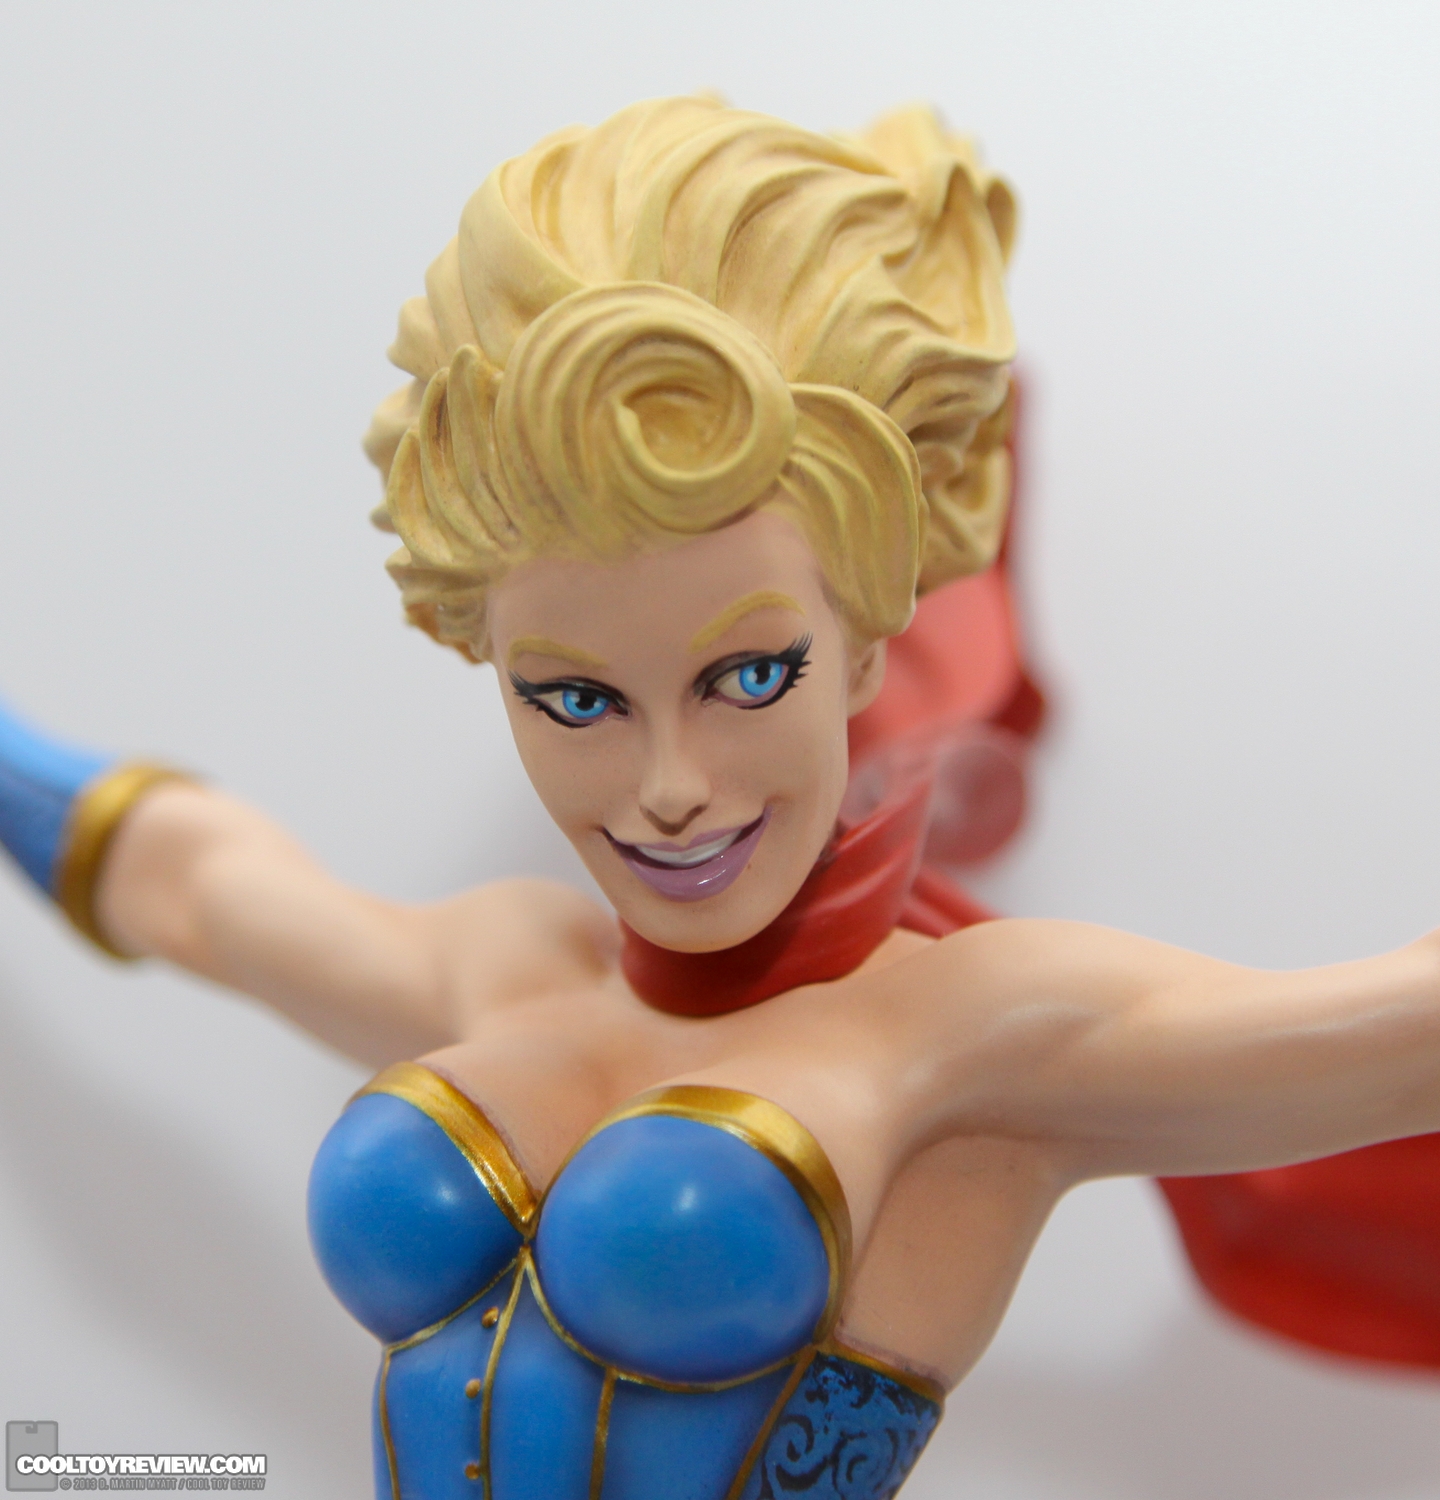 SDCC_2013_DC_Collectibles_Saturday-052.jpg